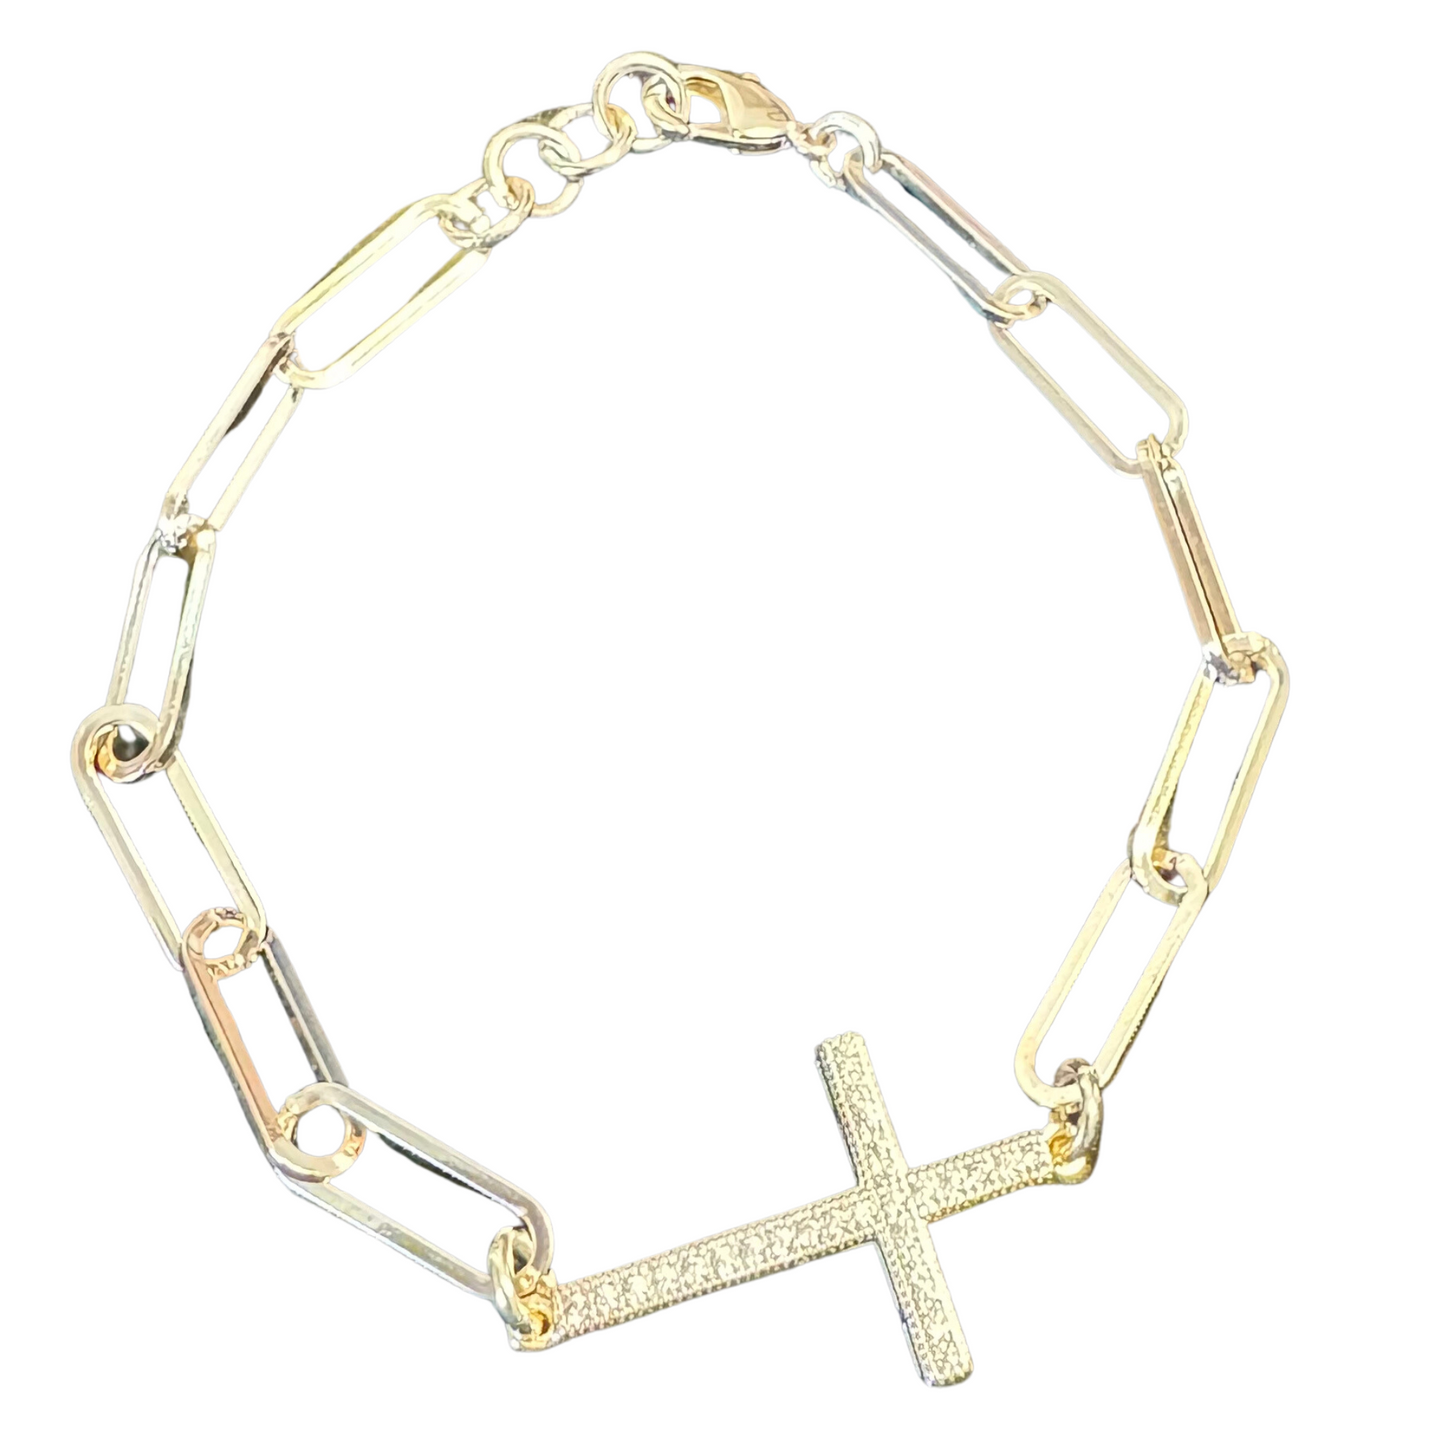 A striking style, this Cross Bracelet is made of a gold chain link material and features an eye-catching cross accent. The adjustable design ensures a comfortable fit to suit your individual style.